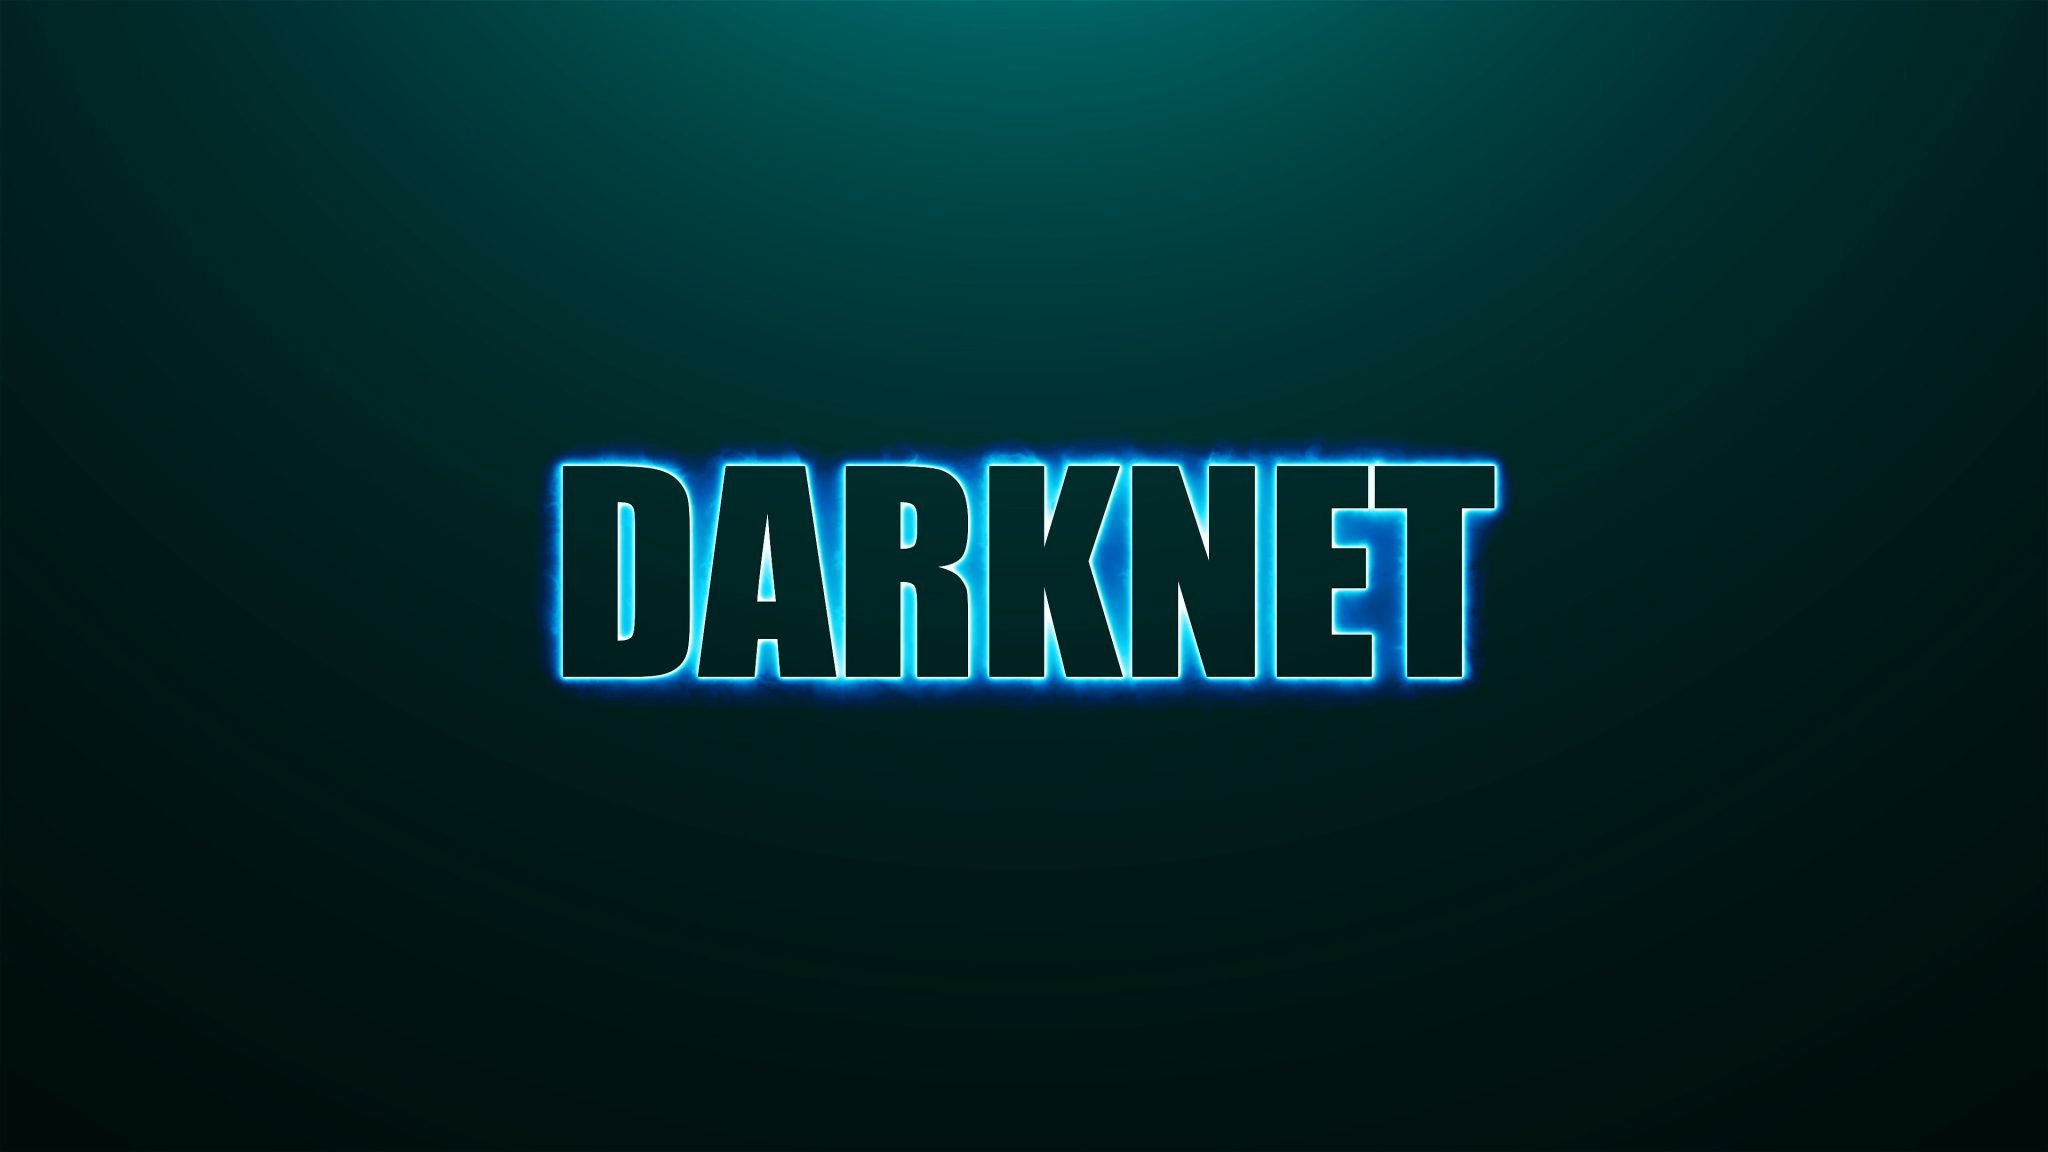 Letters of Darknet text on background with top light, 3d render background, computer generating